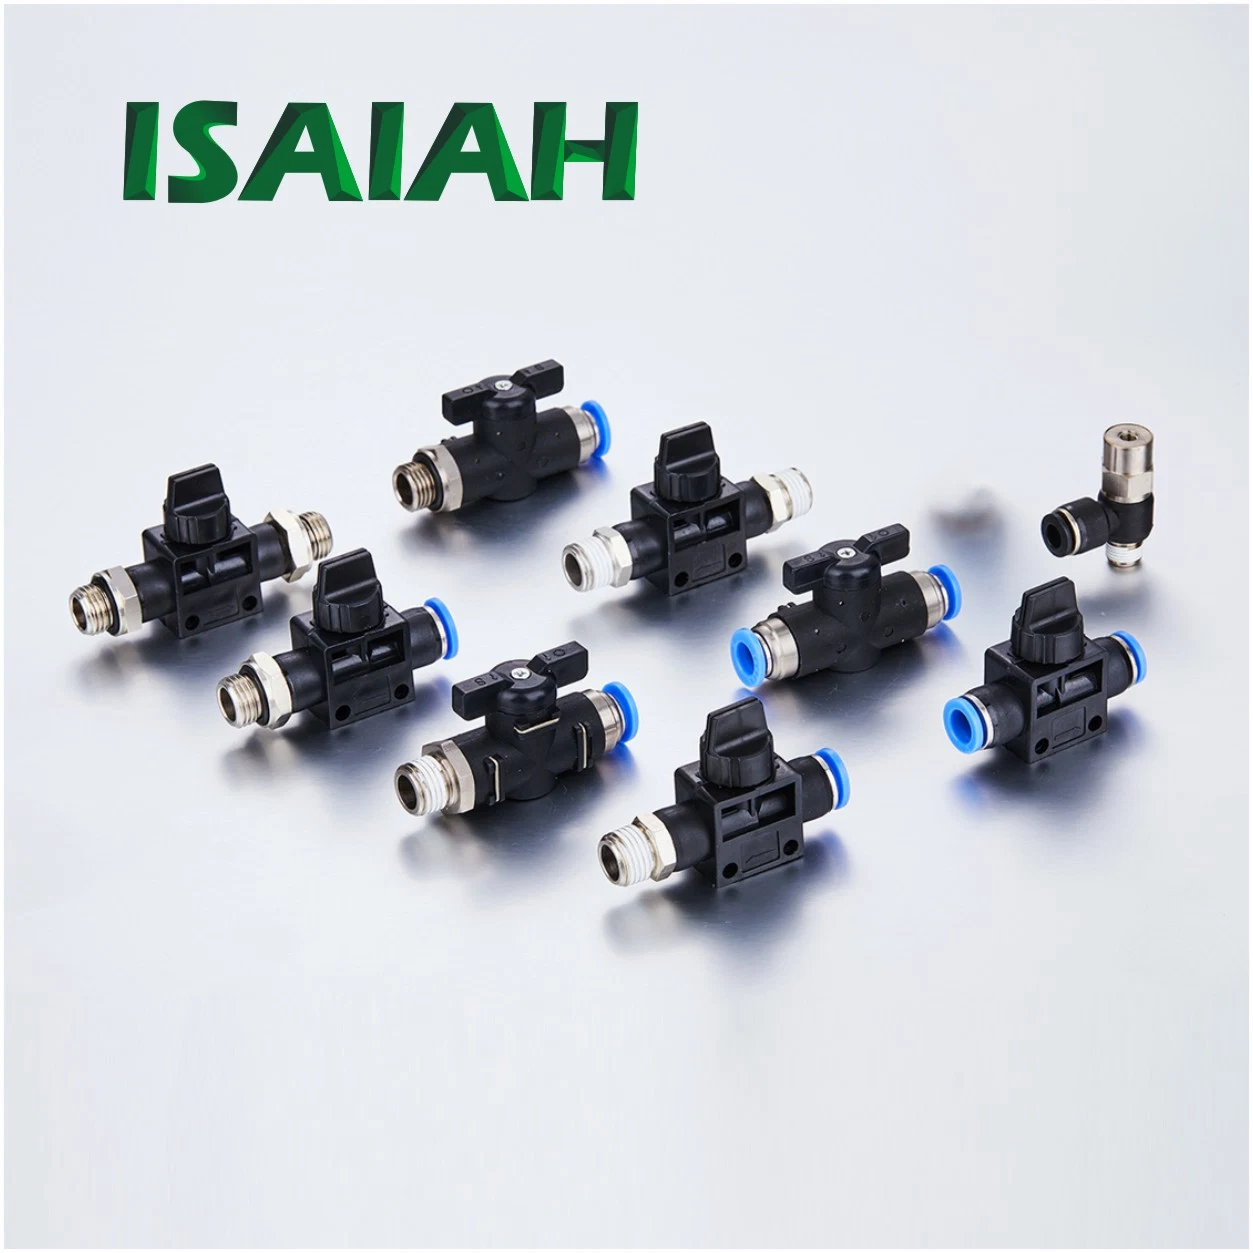 From Isaiah Factory Pneumatic One Touch Mini Stop Fitting Valve